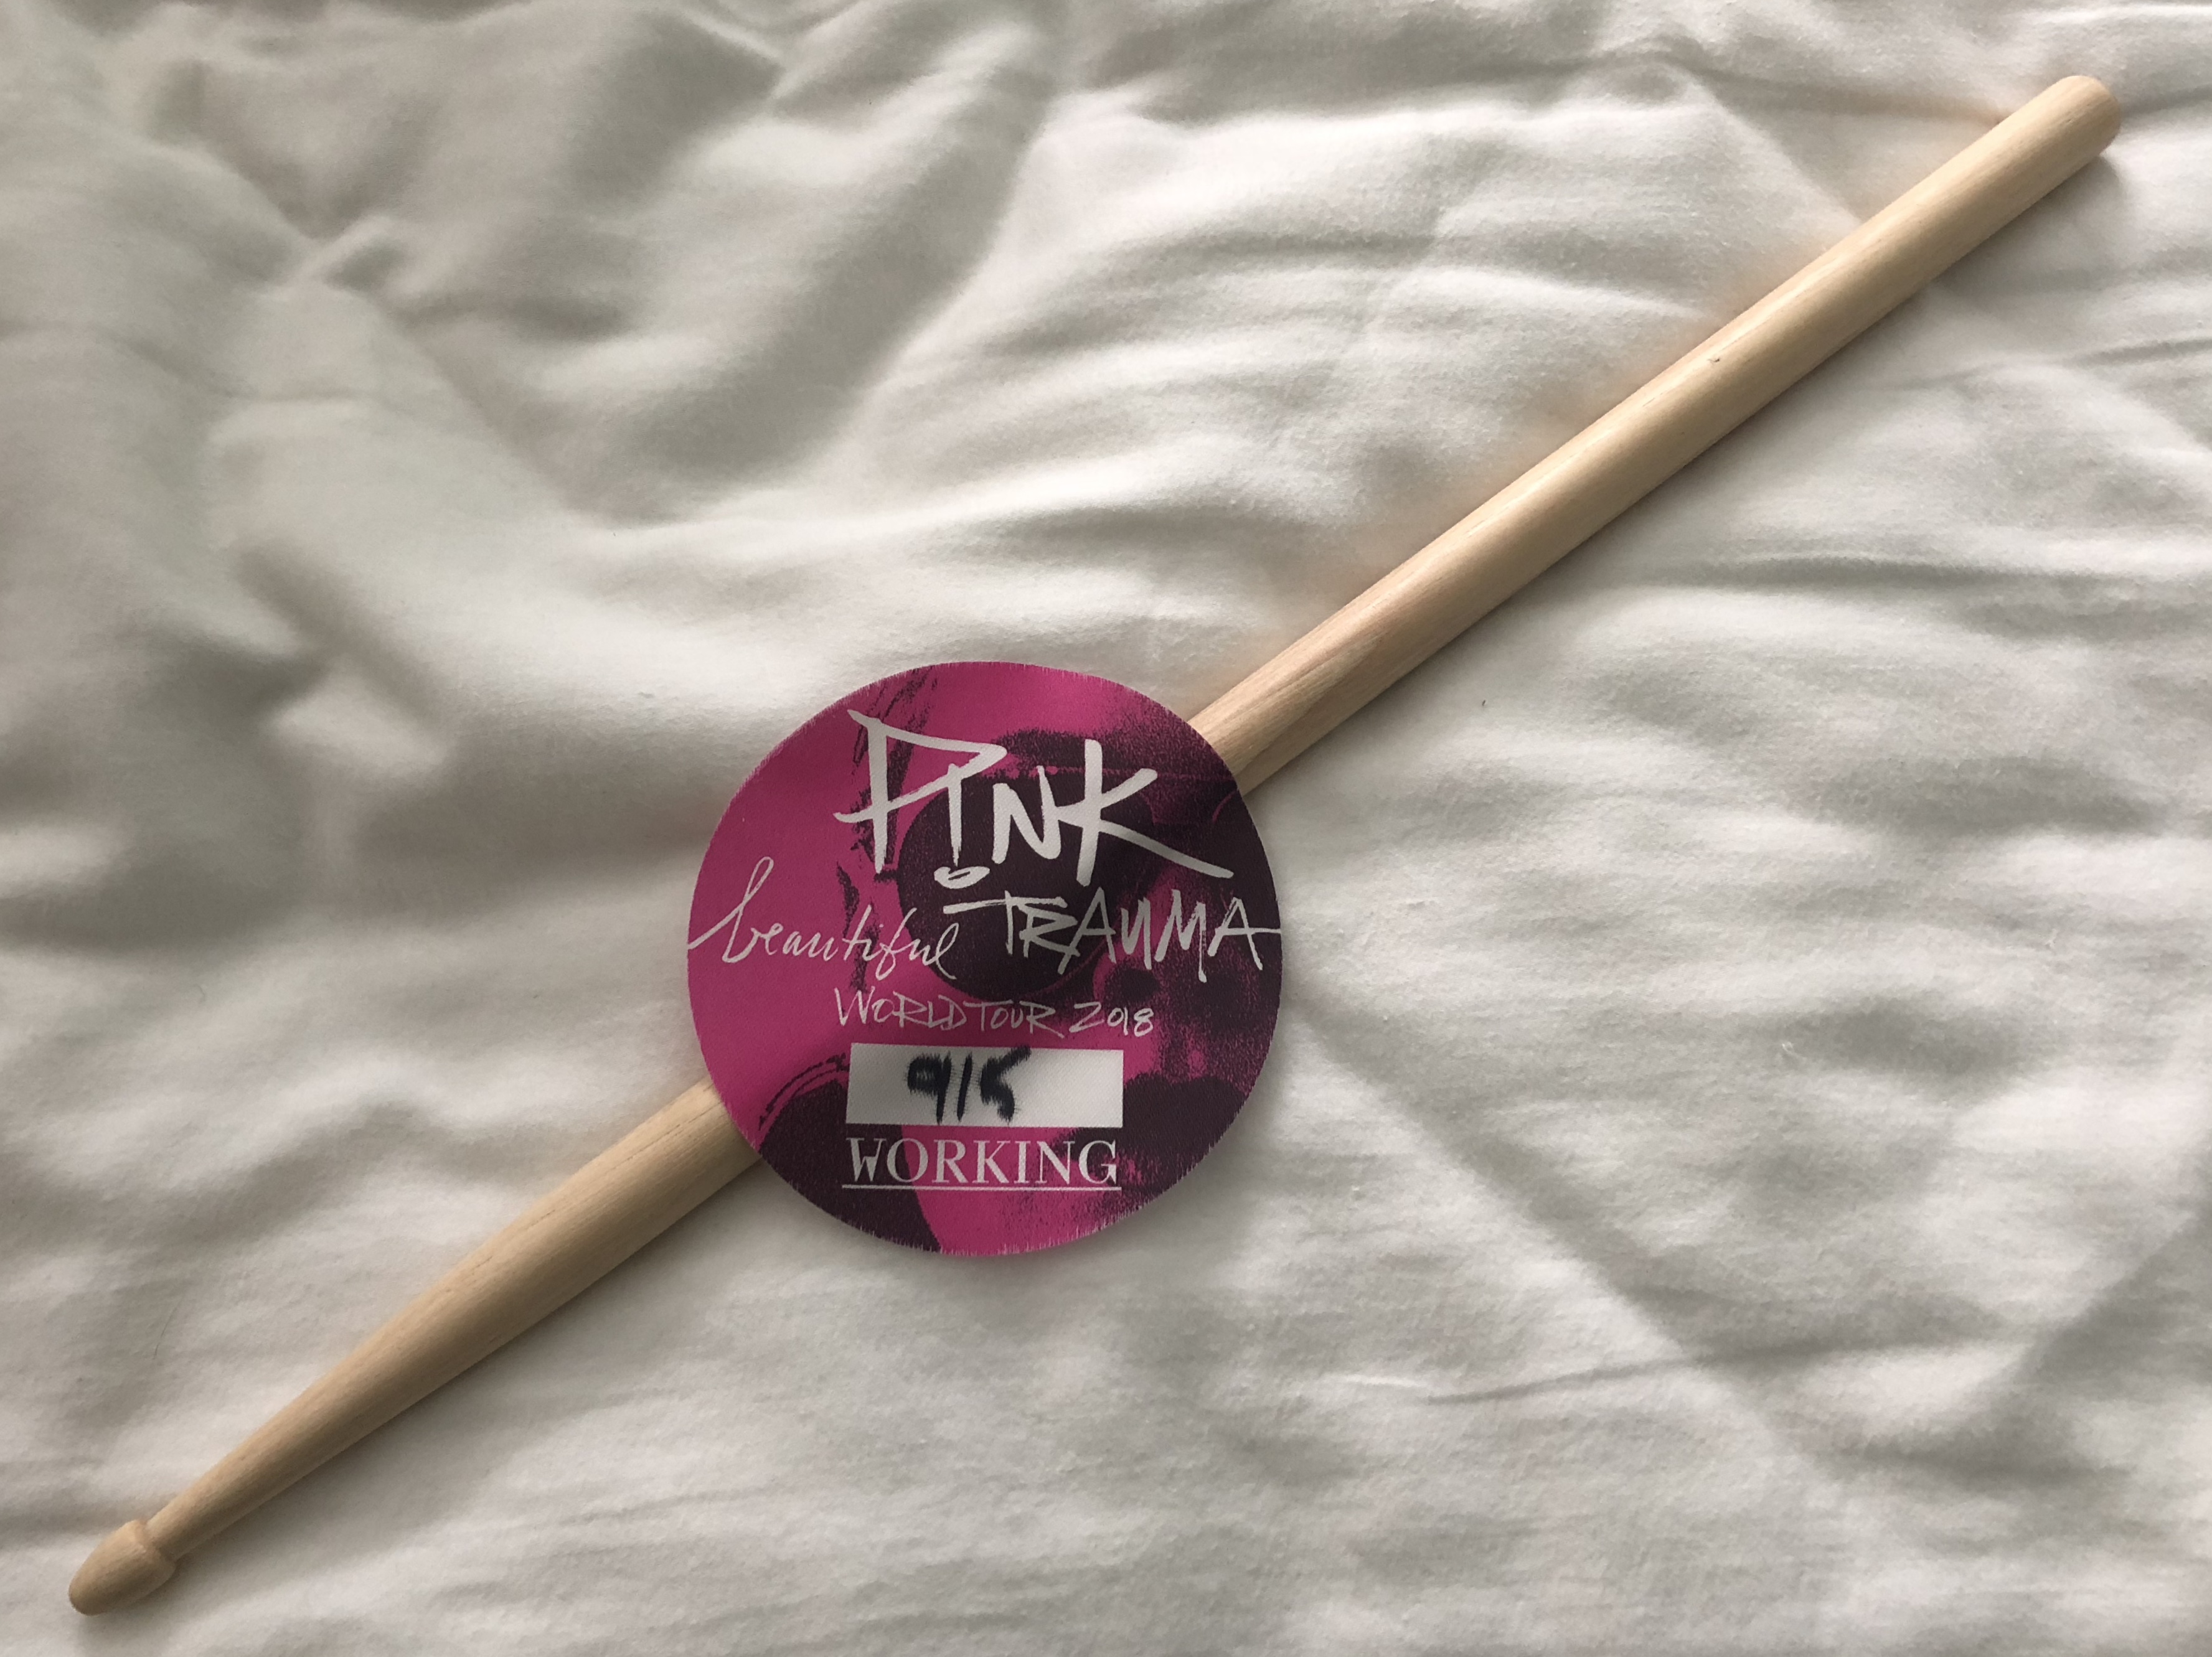 a drum stick and backstage pass